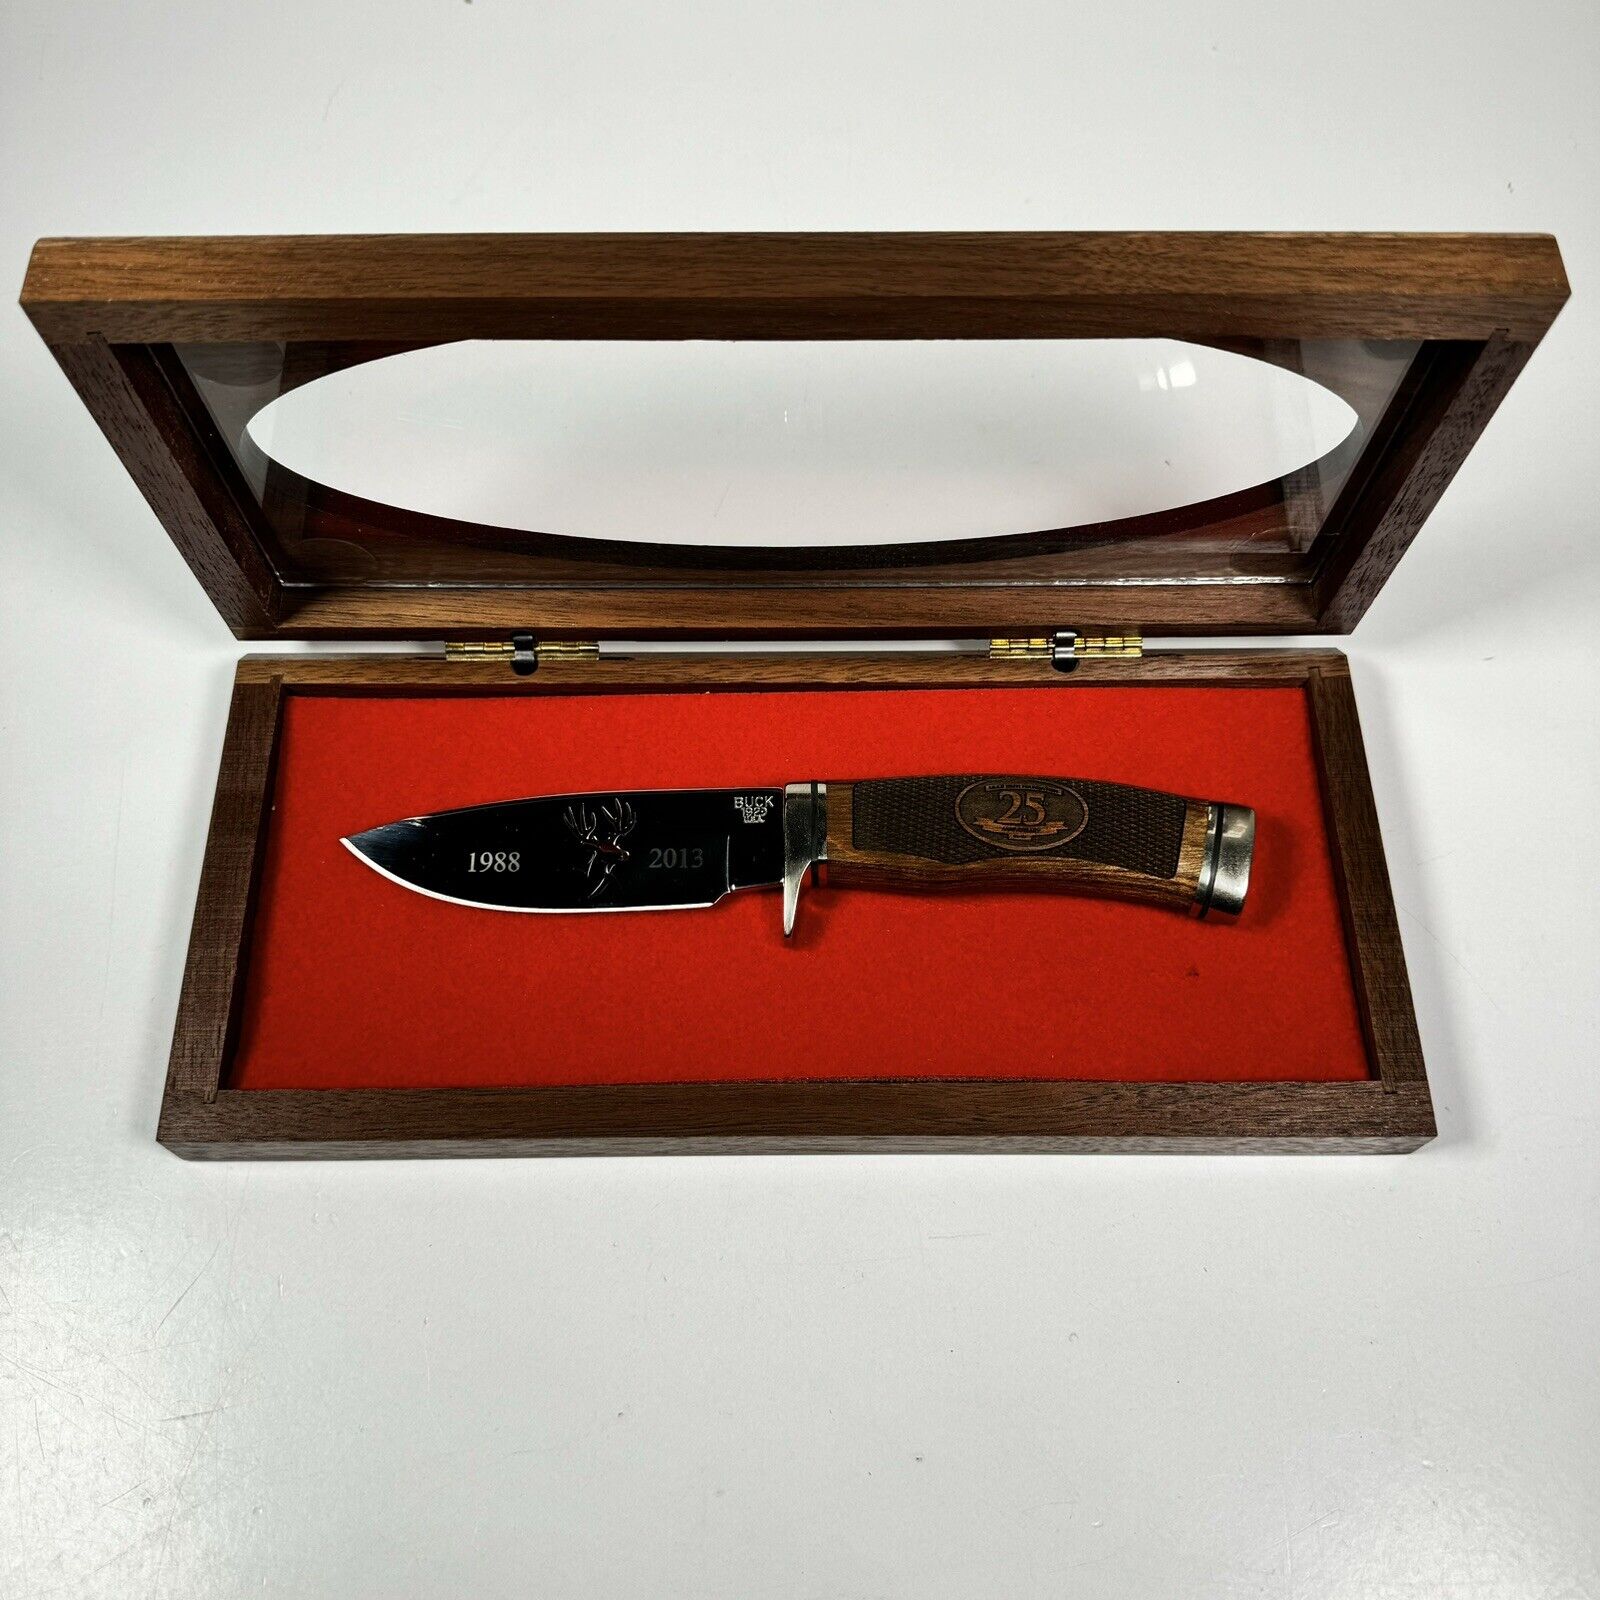 Buck Knife 192 Cutout Mule Deer Foundation Etched Limited Edition Display Box